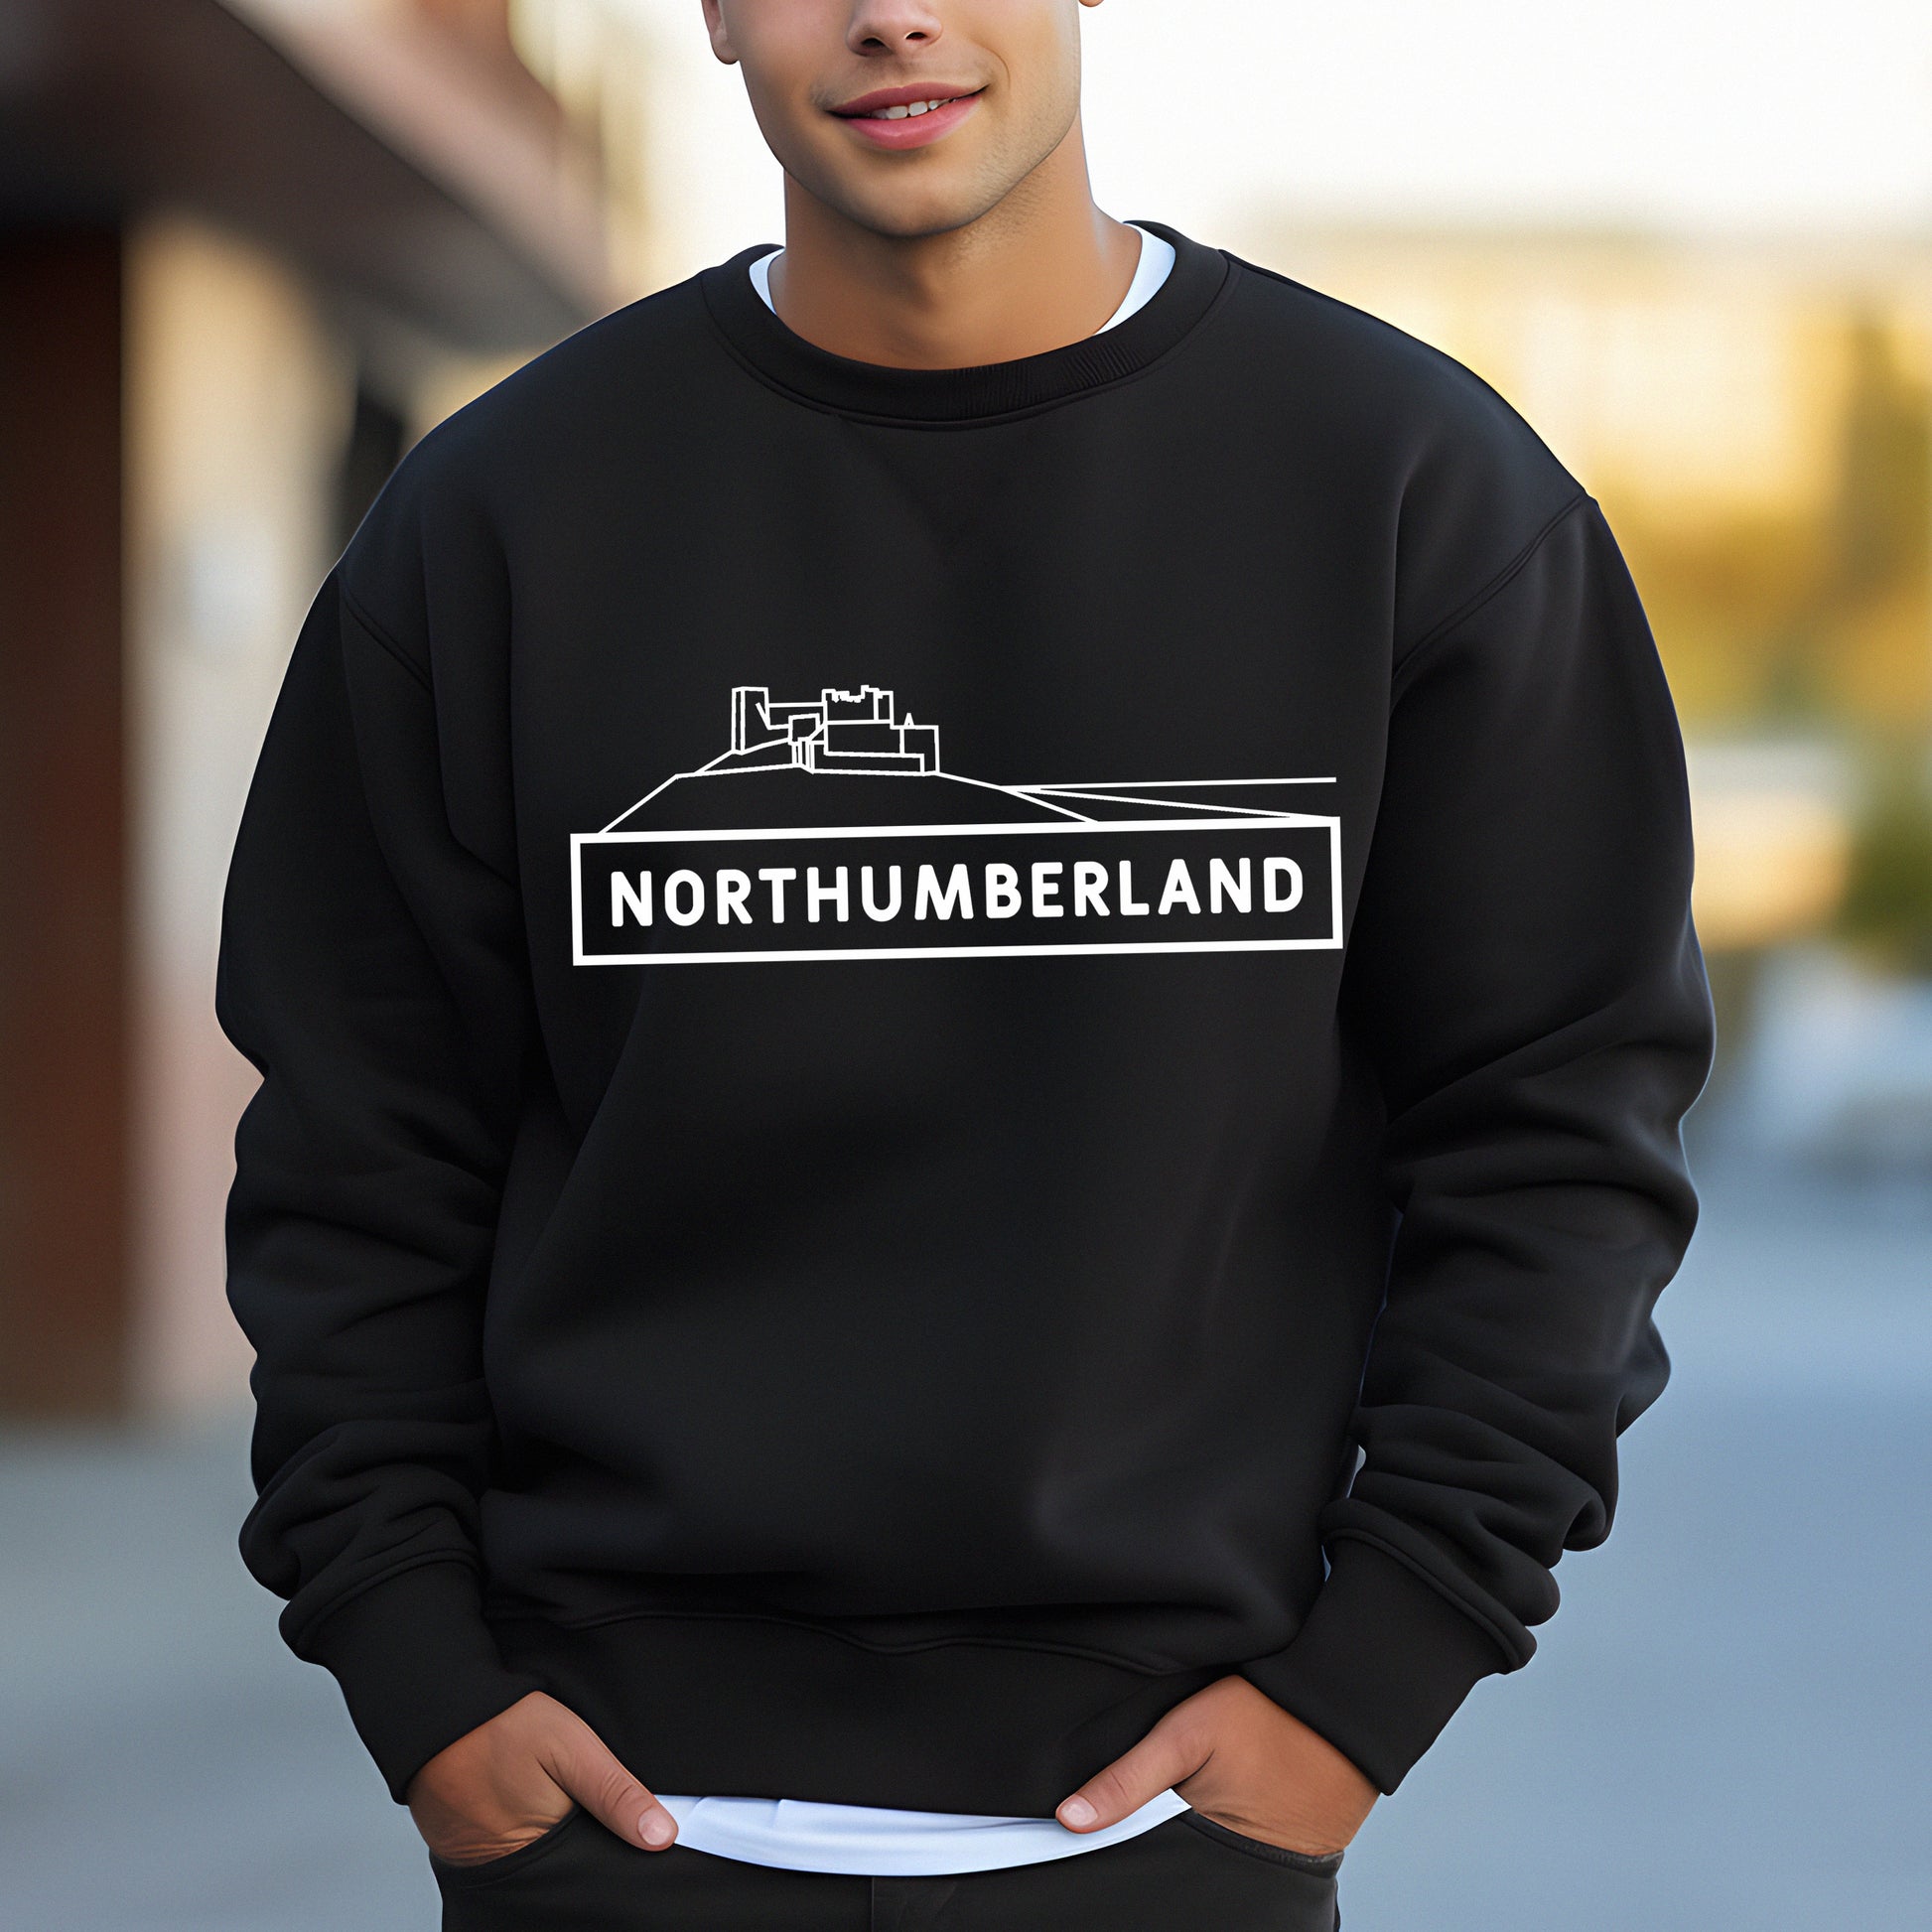 Men's Black sweatshirt with white Northumberland text and bamburgh castle